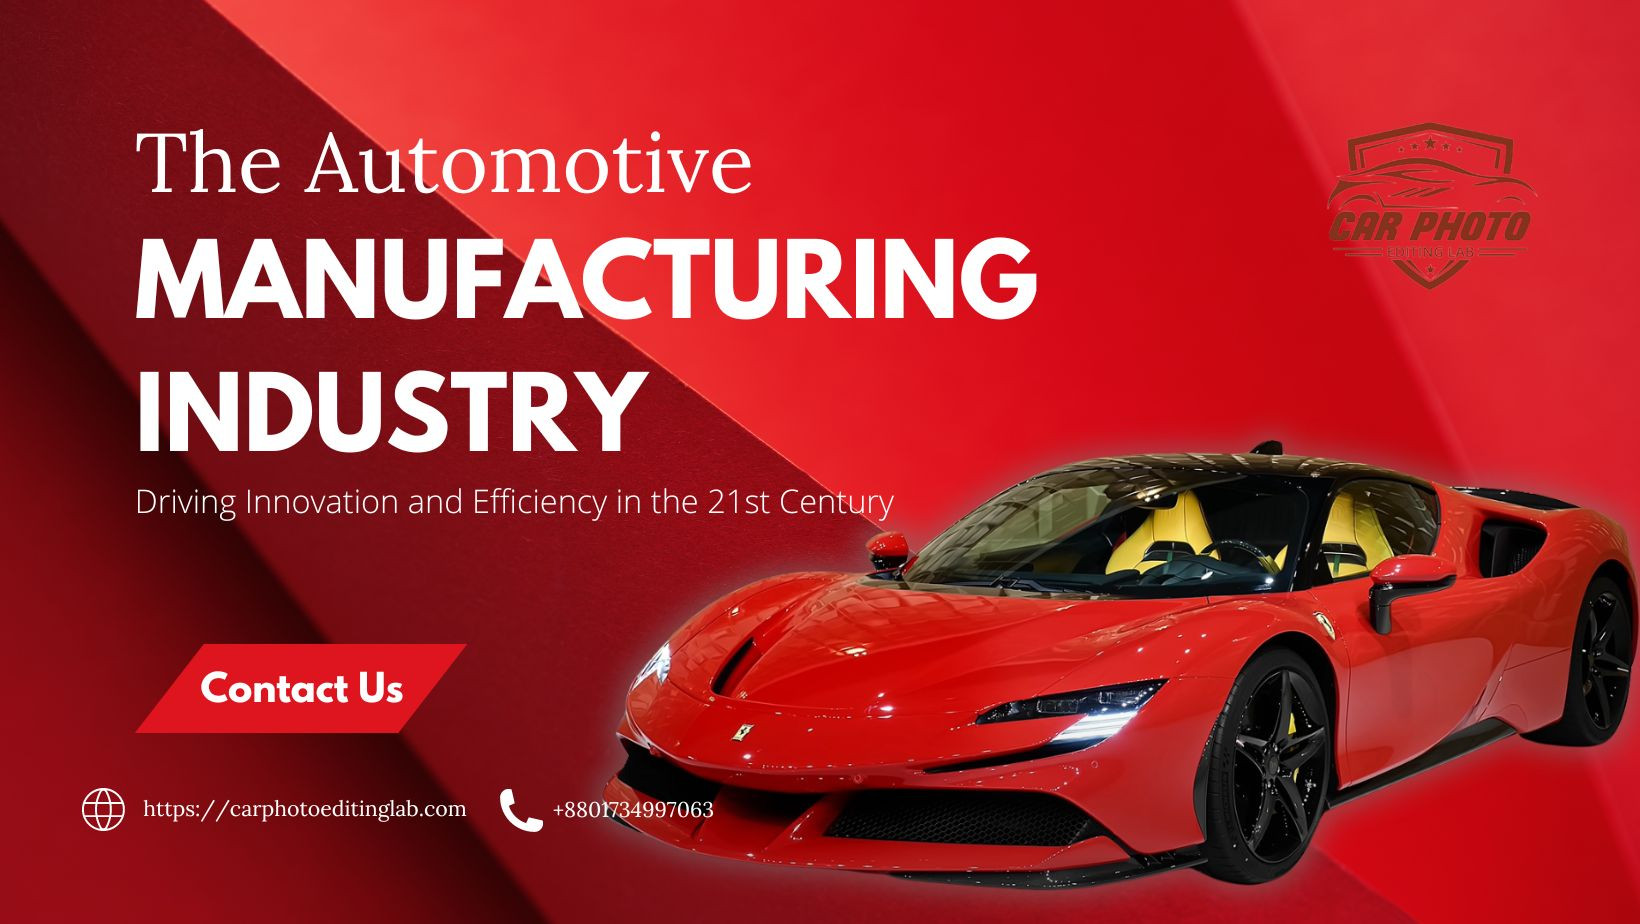 The Automotive Manufacturing Industry: Driving Innovation and Efficiency in the 21st Century